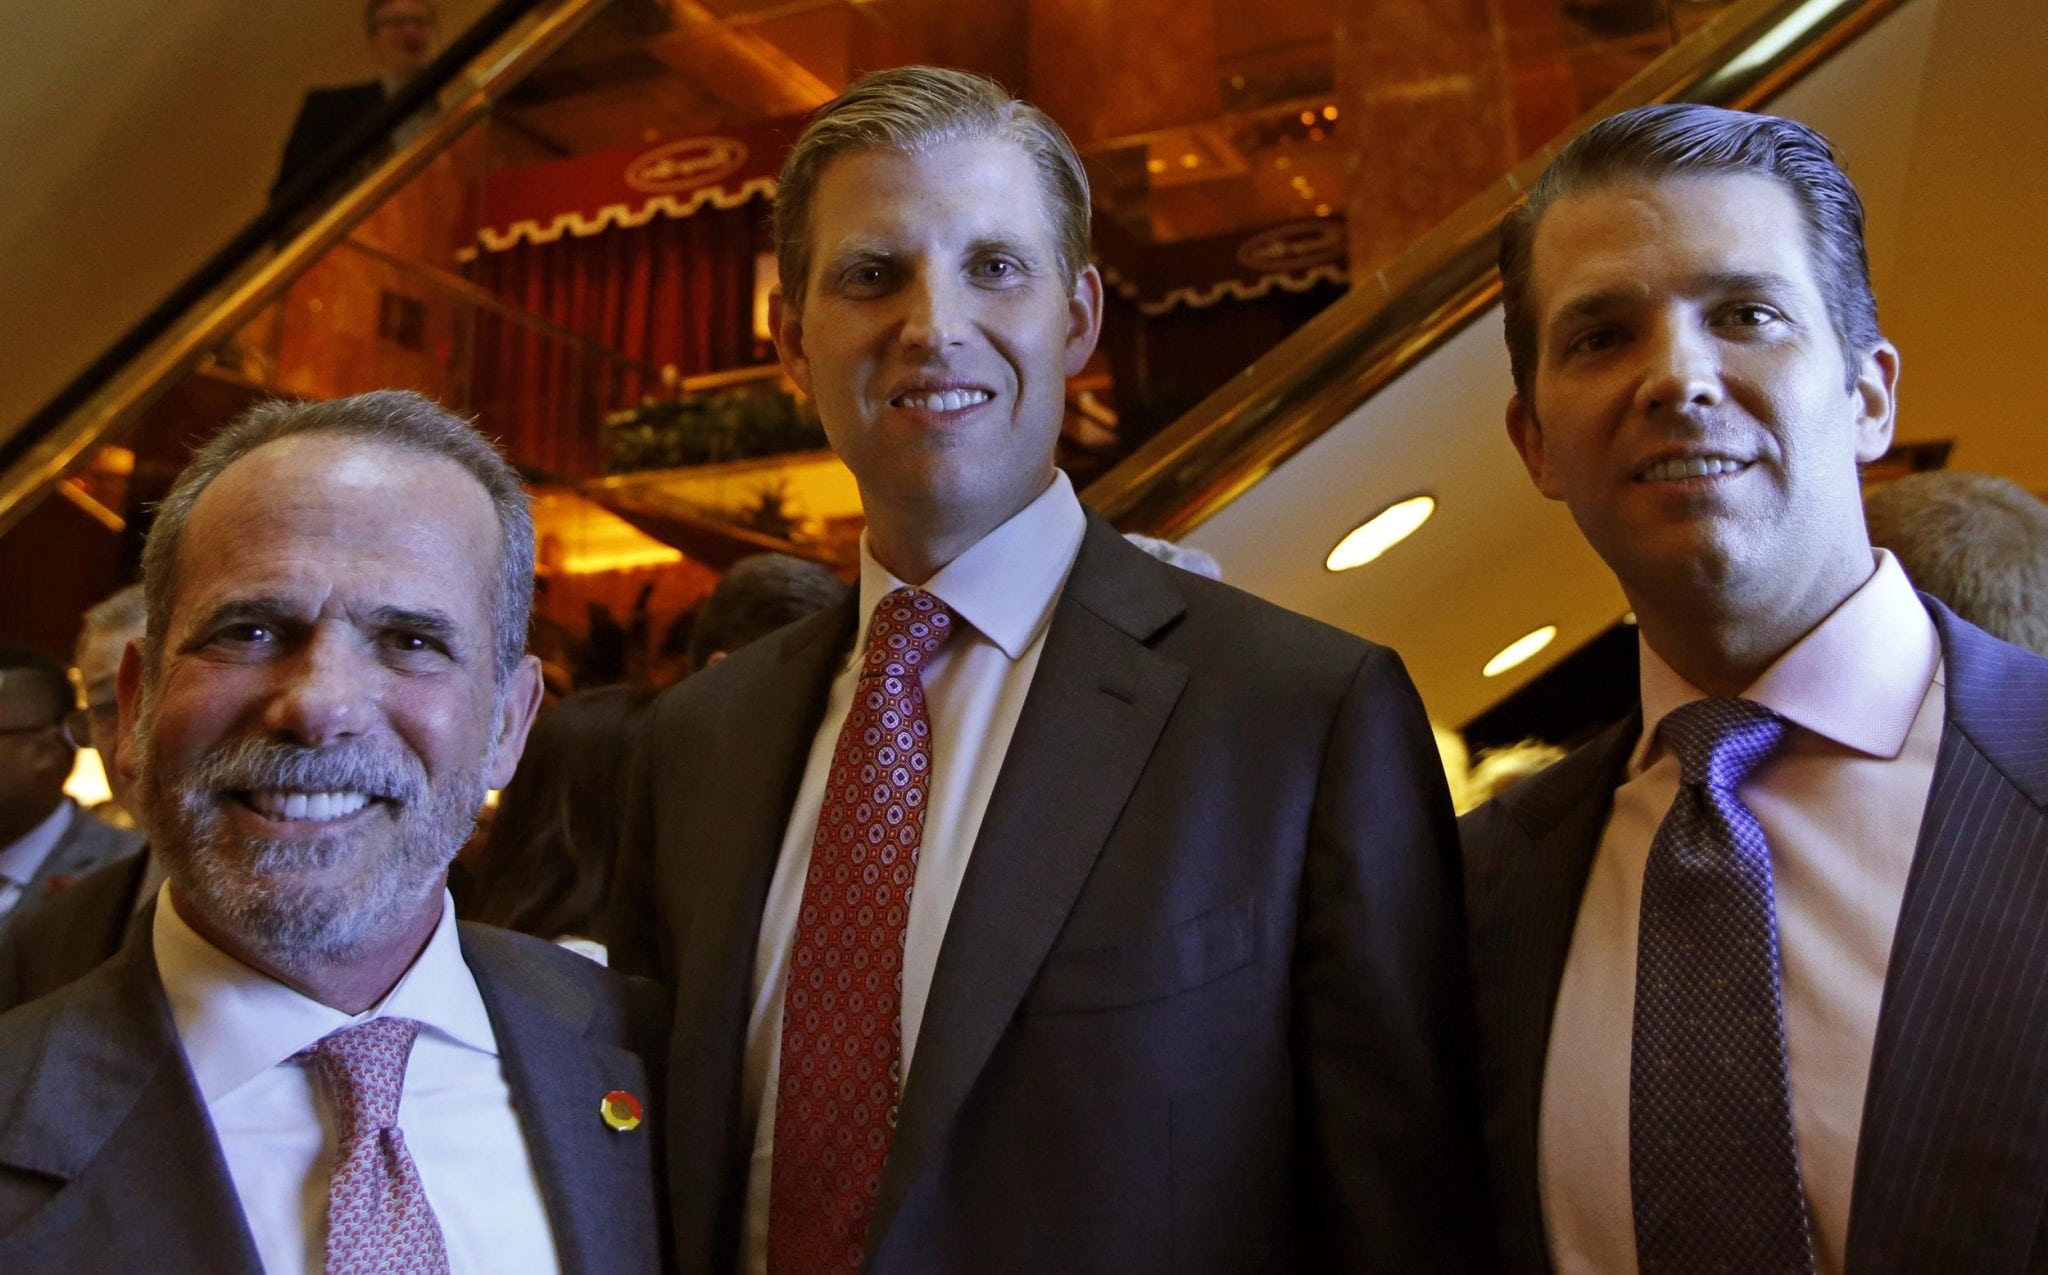 Eric Danziger, CEO of Trump Hotels, left, joined Eric Trump, center, and Donald Trump Jr., both of whom are executive Vice Presidents of The Trump Organization, in announcing the debut of the new American Idea hotel brand.
            